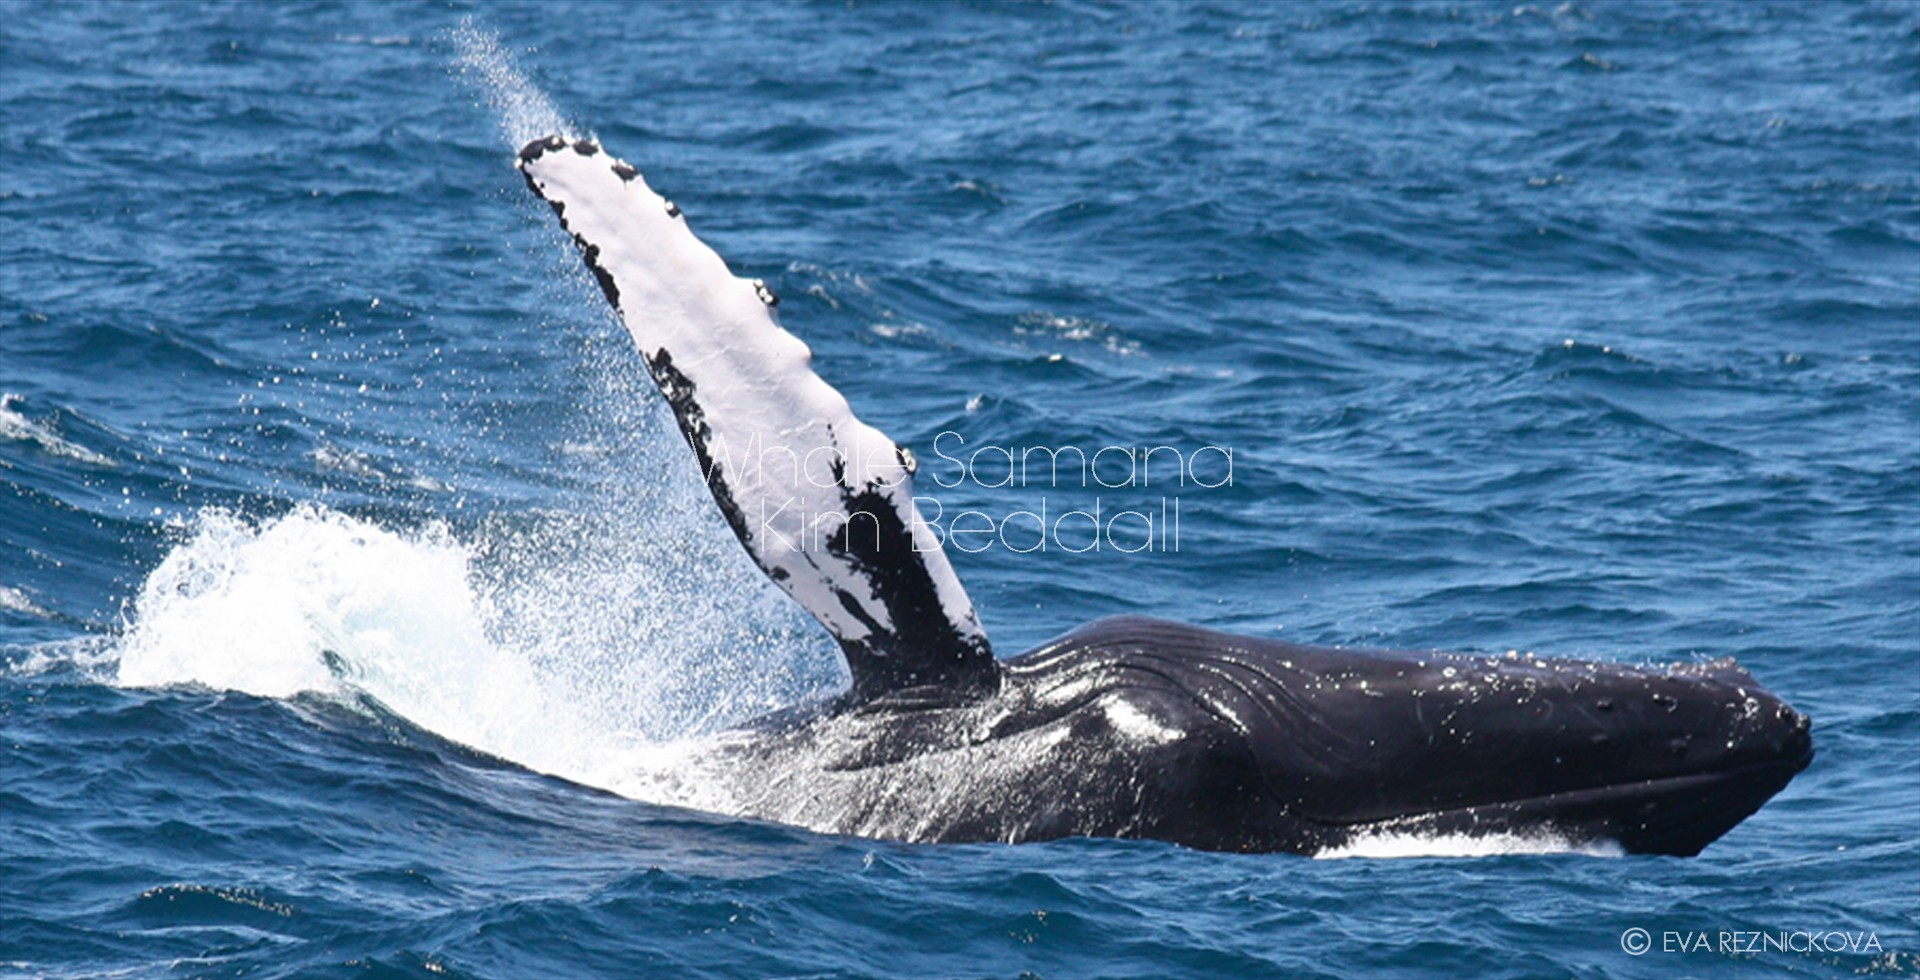 Samana Dominican Republic Whale Watching Pictures.